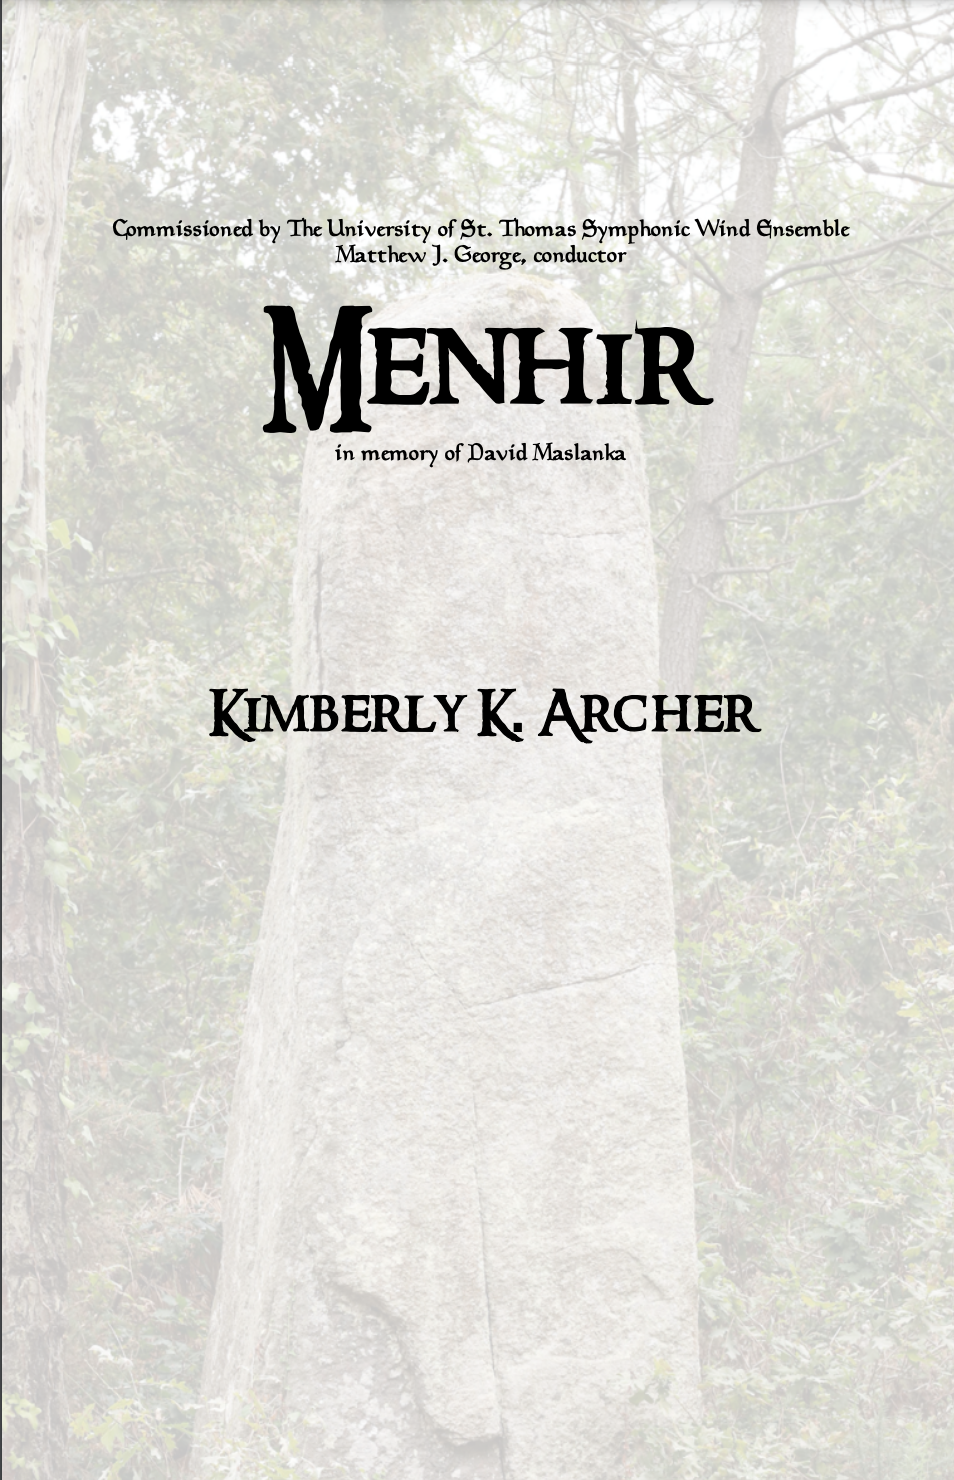 Menhir by Kimberly Archer